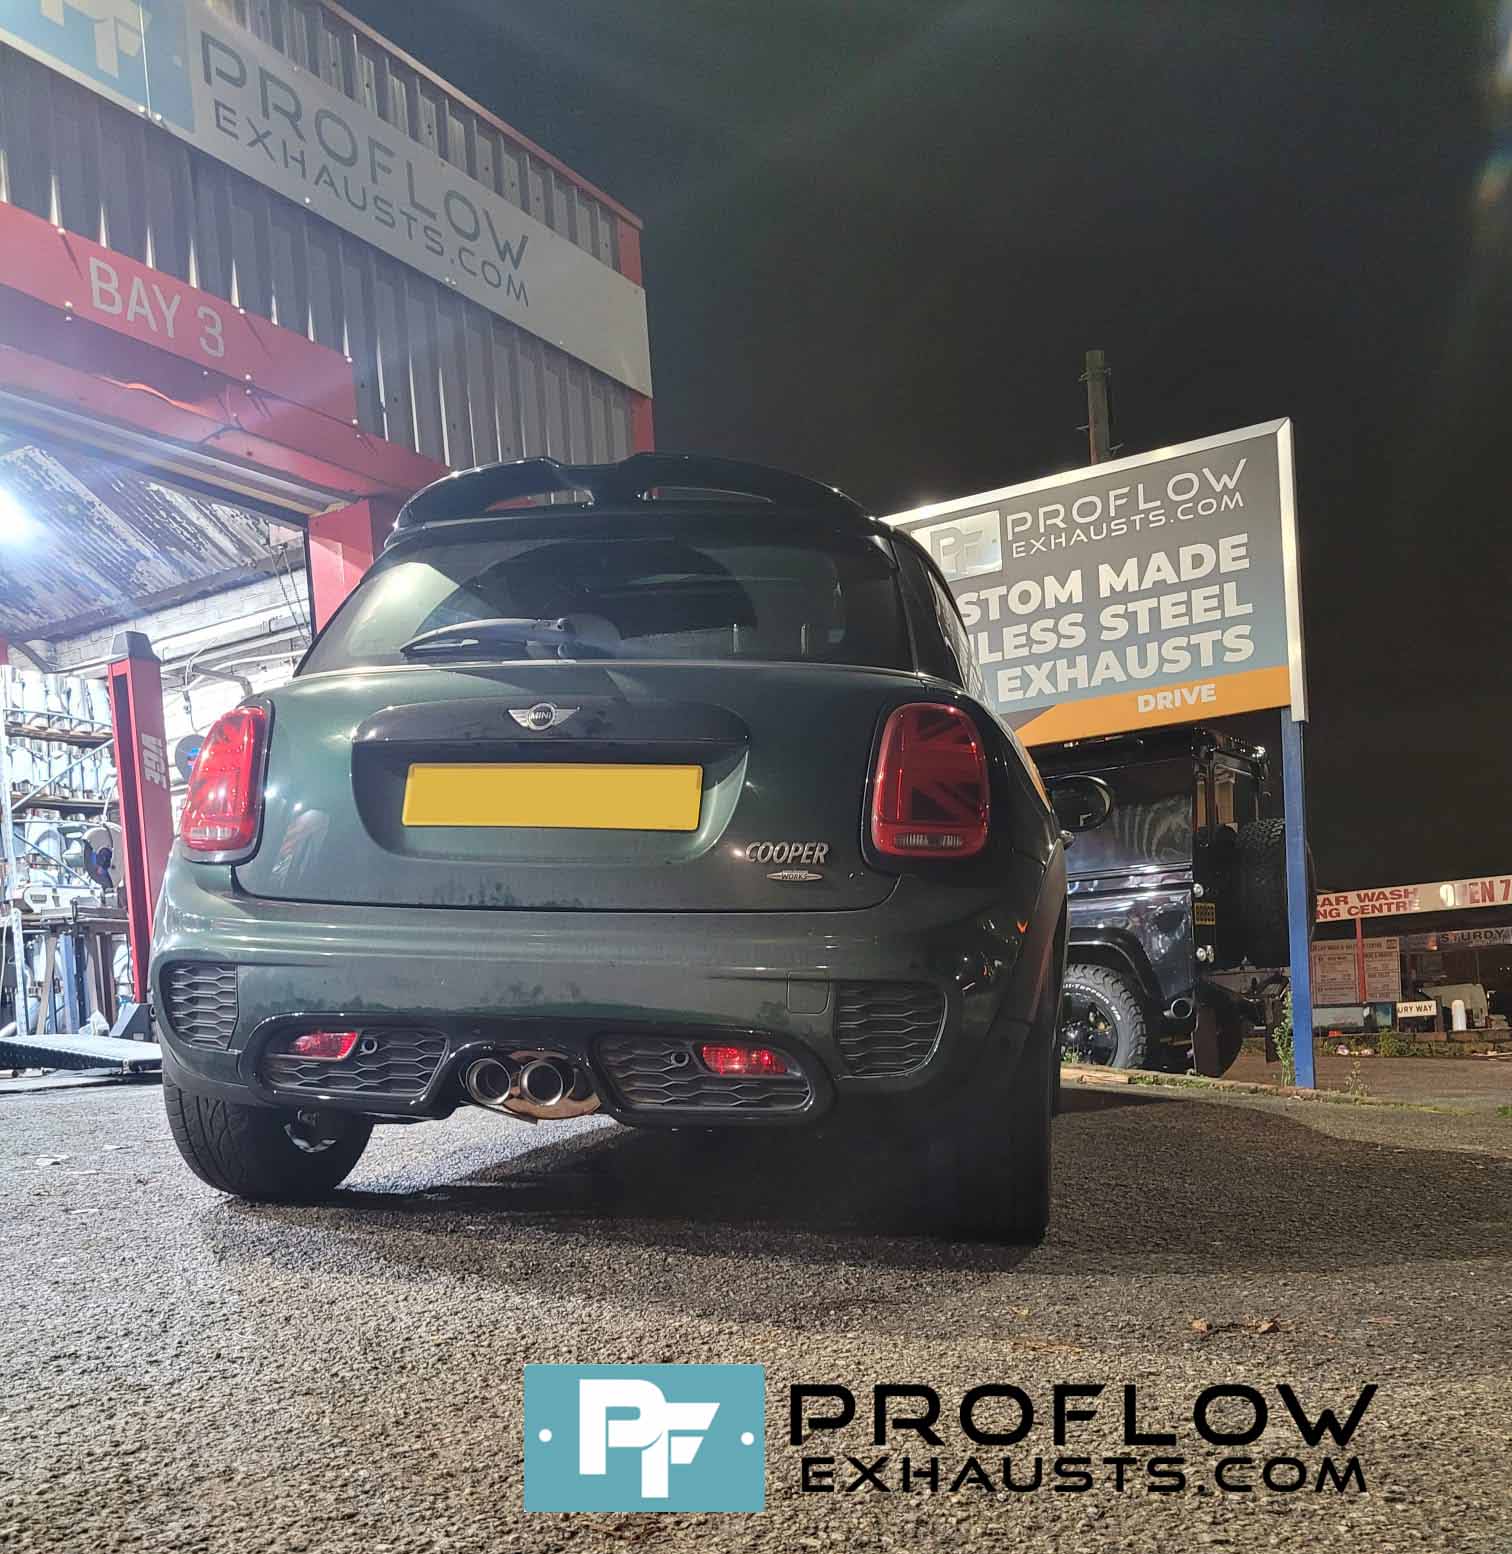 Proflow Exhausts Custom Built Stainless Steel Exhaust Cat Back For Mini Cooper (7)